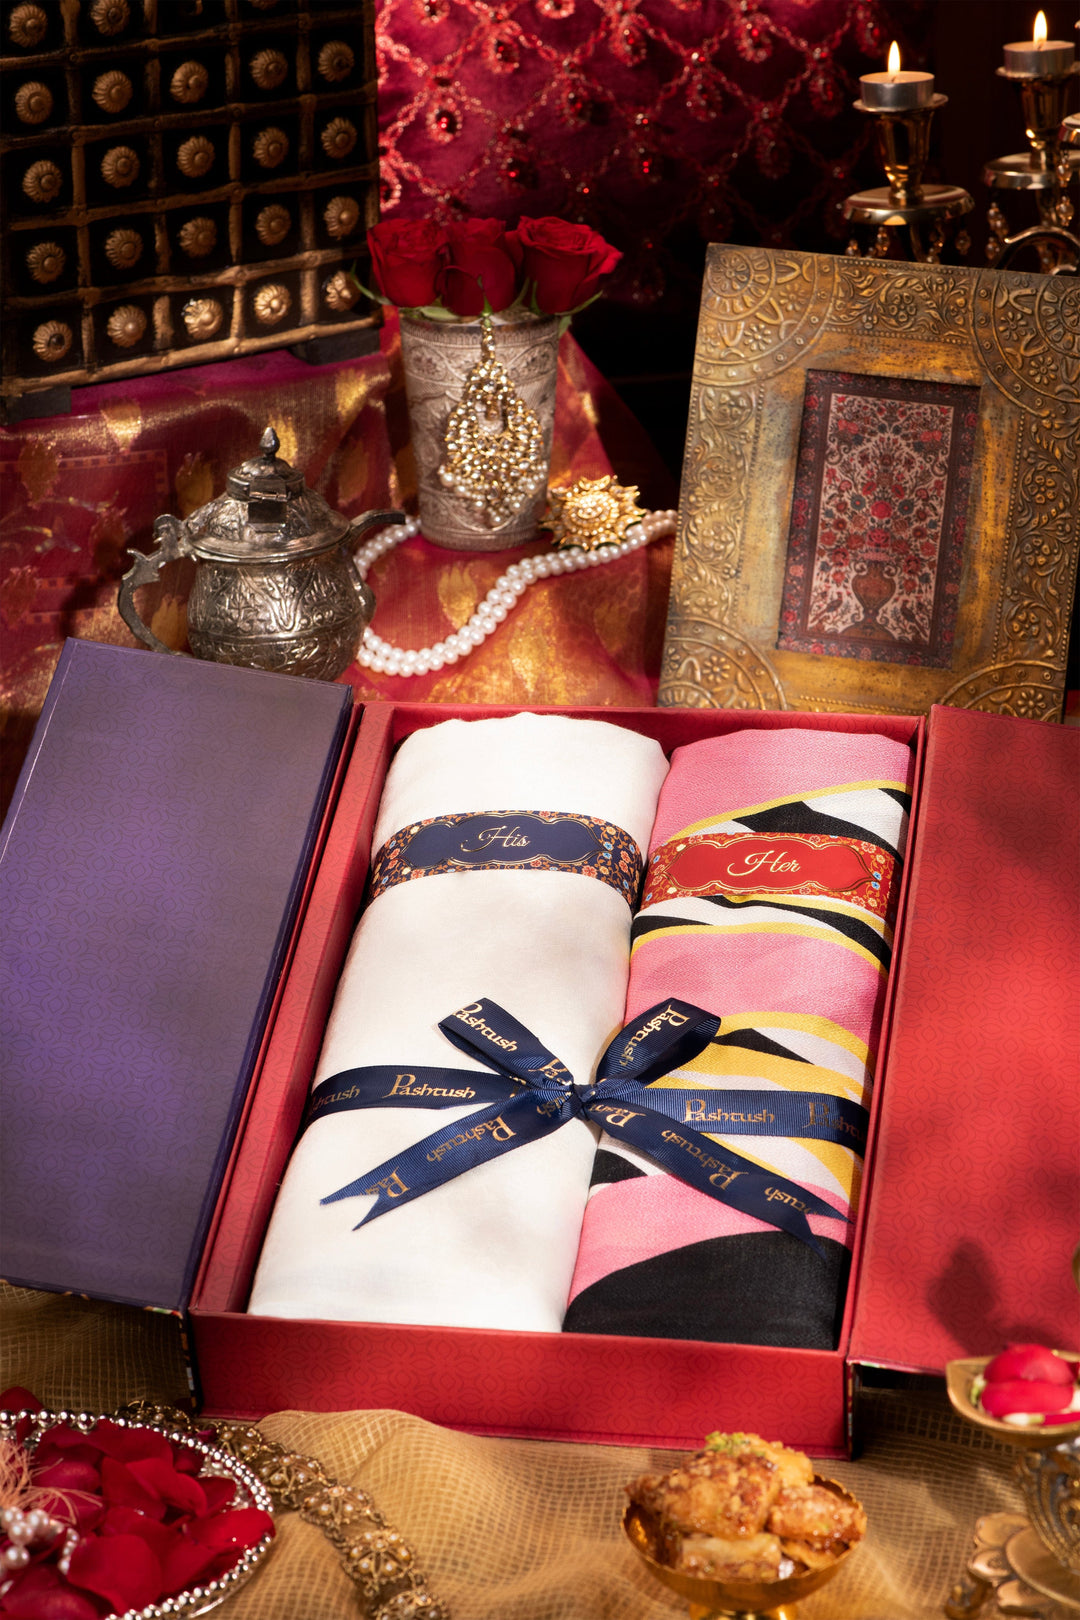 Pashtush India Gift Pack Pashtush His And Her Set Of Self and Bamboo Print Stoles With Premium Gift Box Packaging, Ivory and Multi Colour